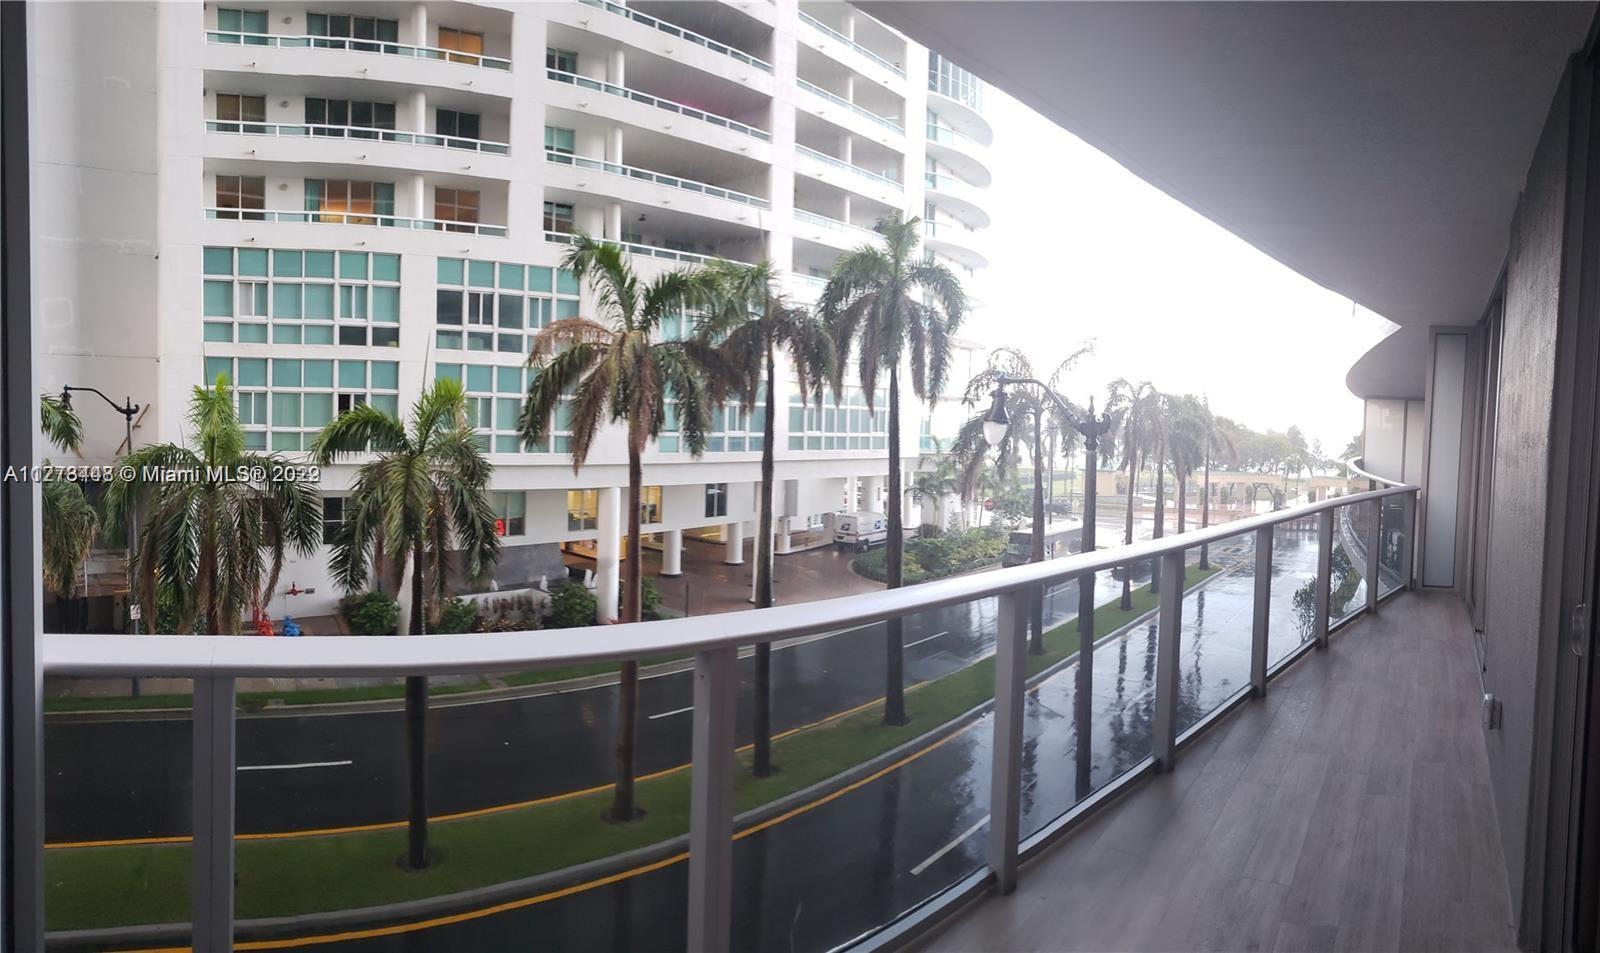 Luxurious 1bed/1.5baths with Large balcony, 1 Assigned Parking. Overlooking Miami City. Panoramic wi